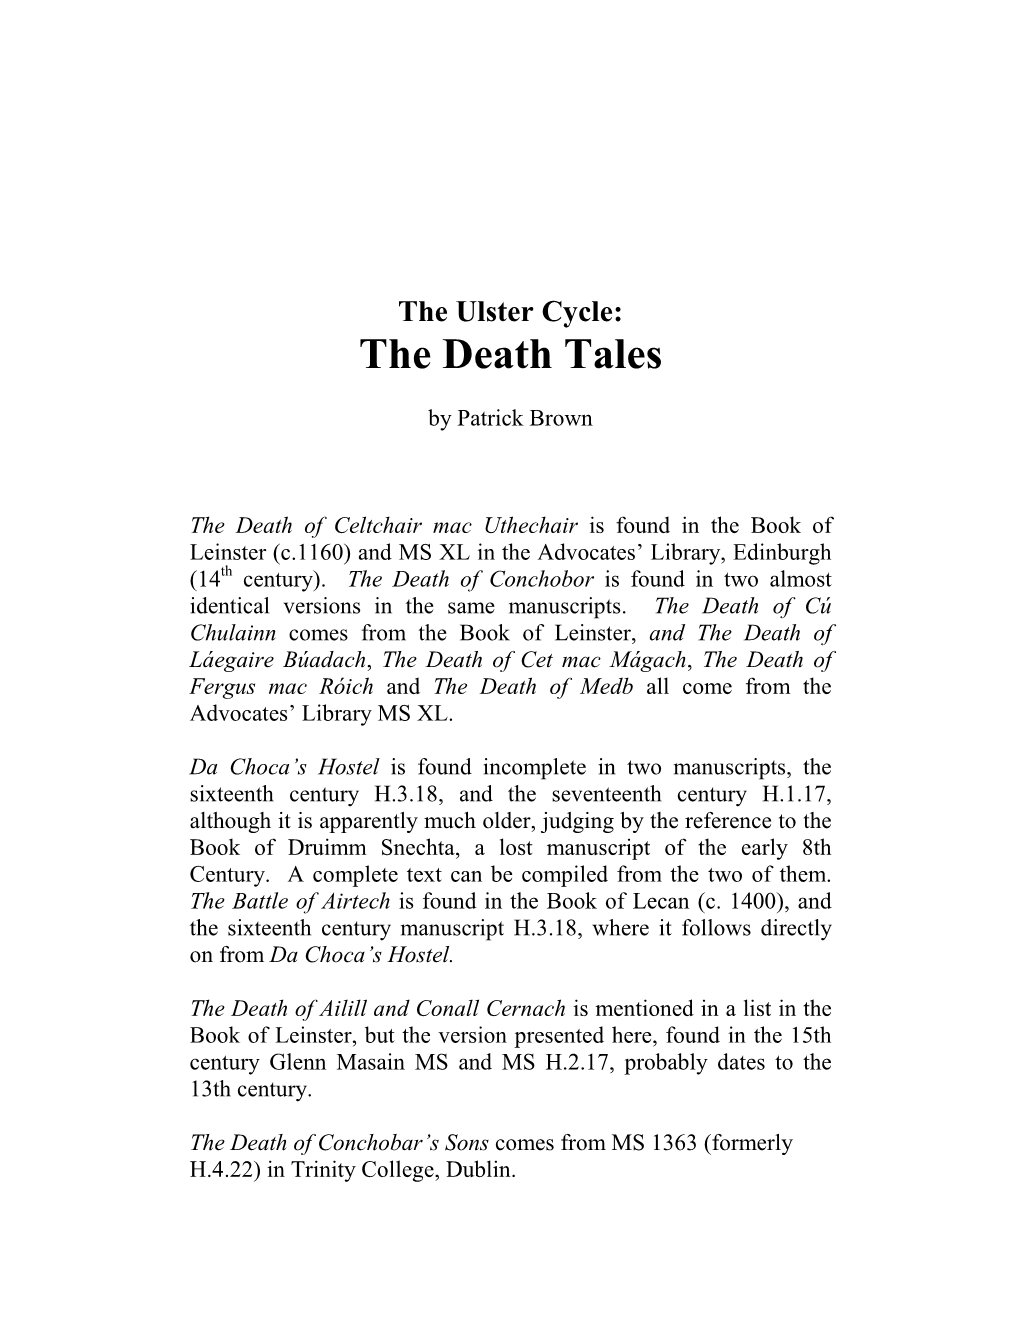 The Death Tales